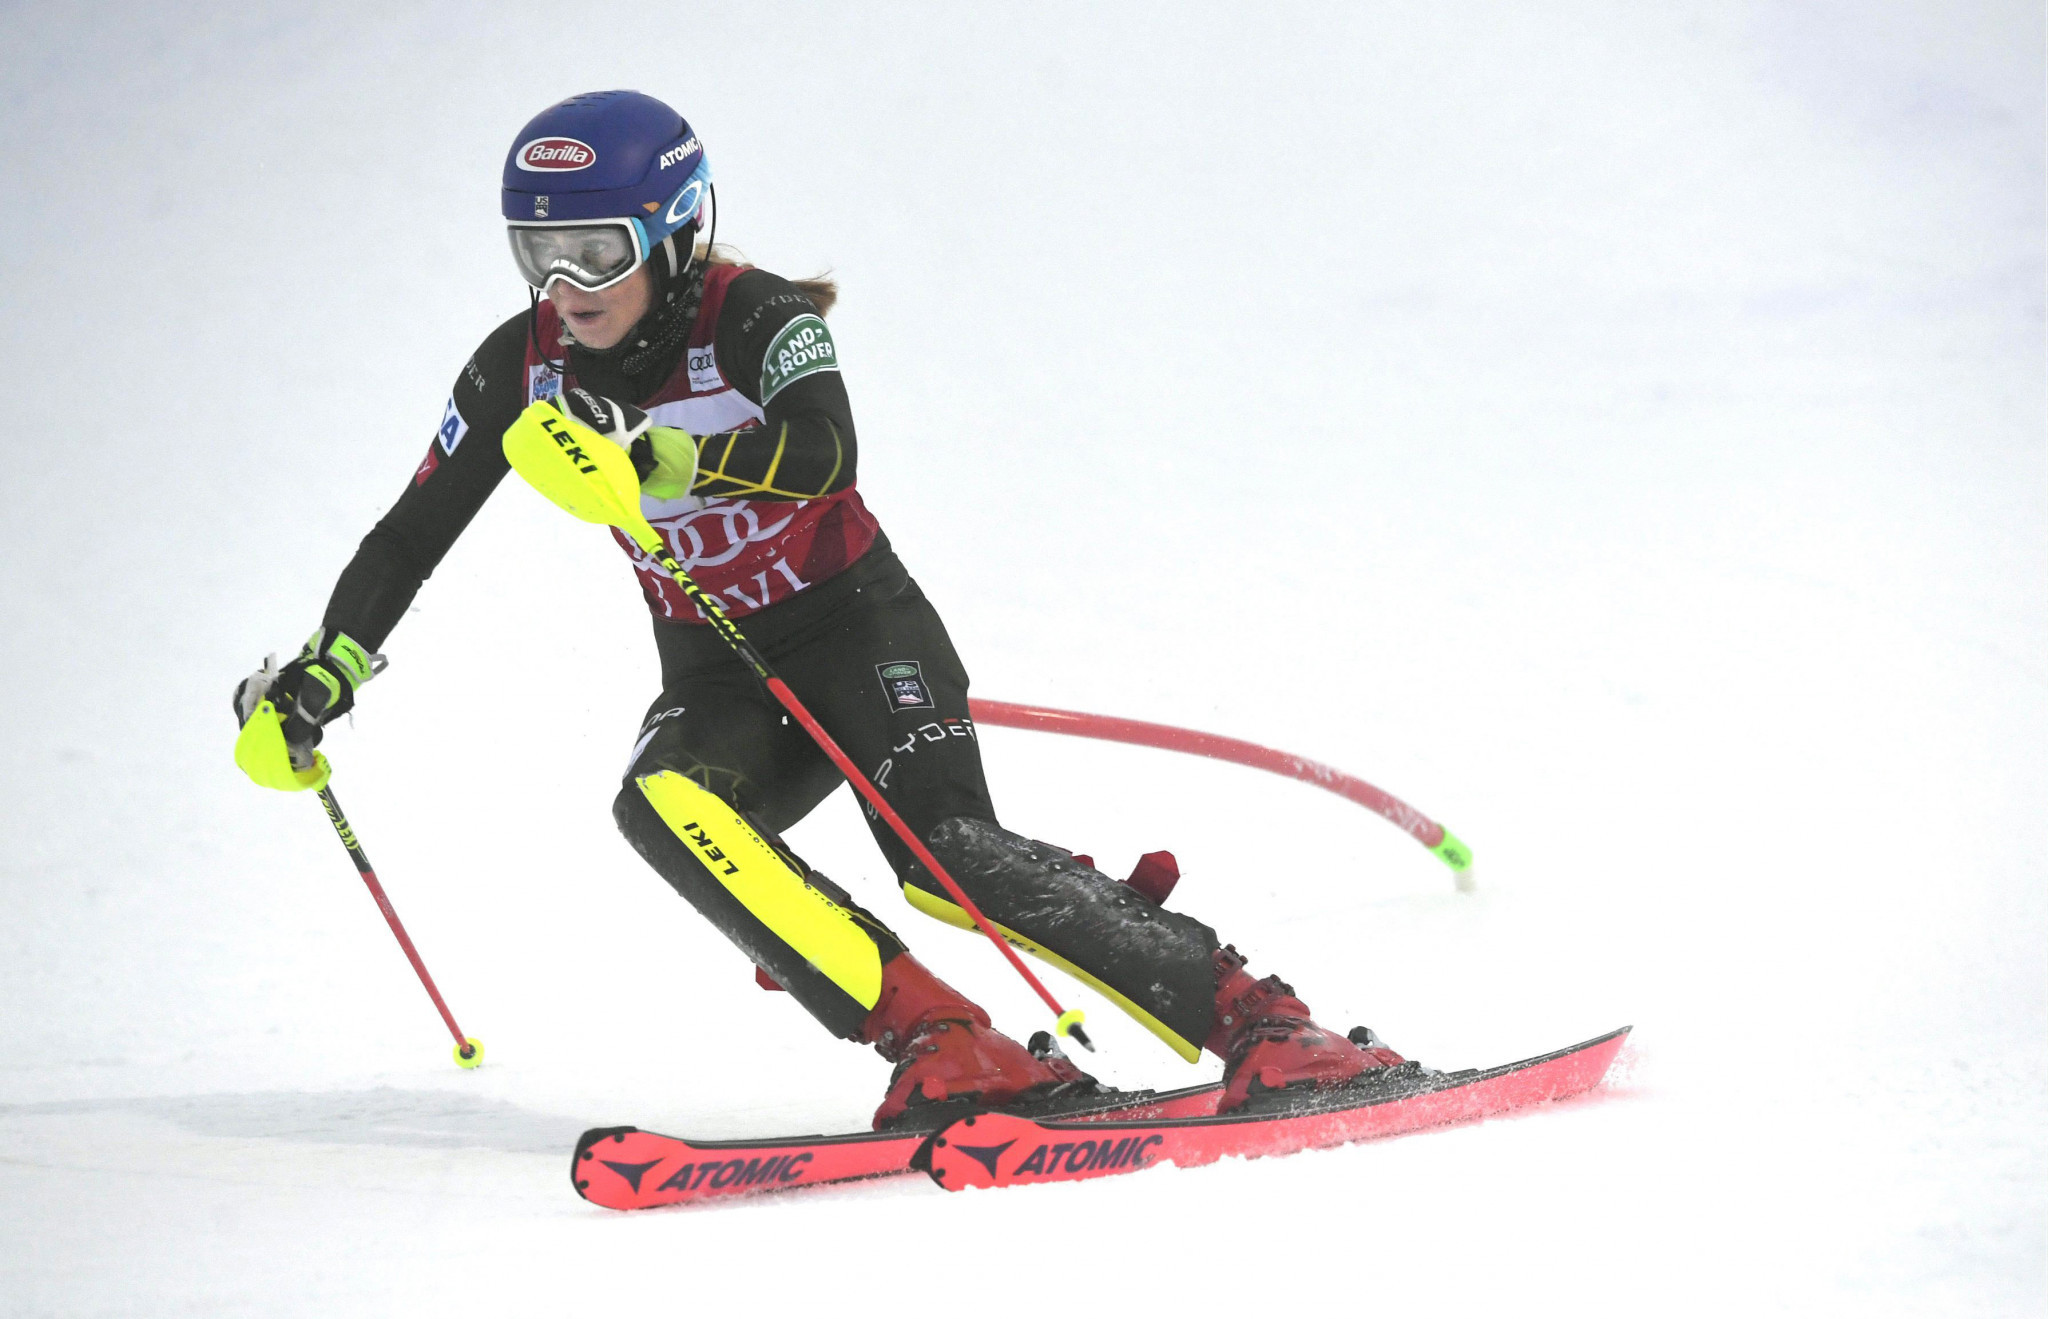 Shiffrin breaks record for slalom victories at FIS Alpine Skiing World Cup